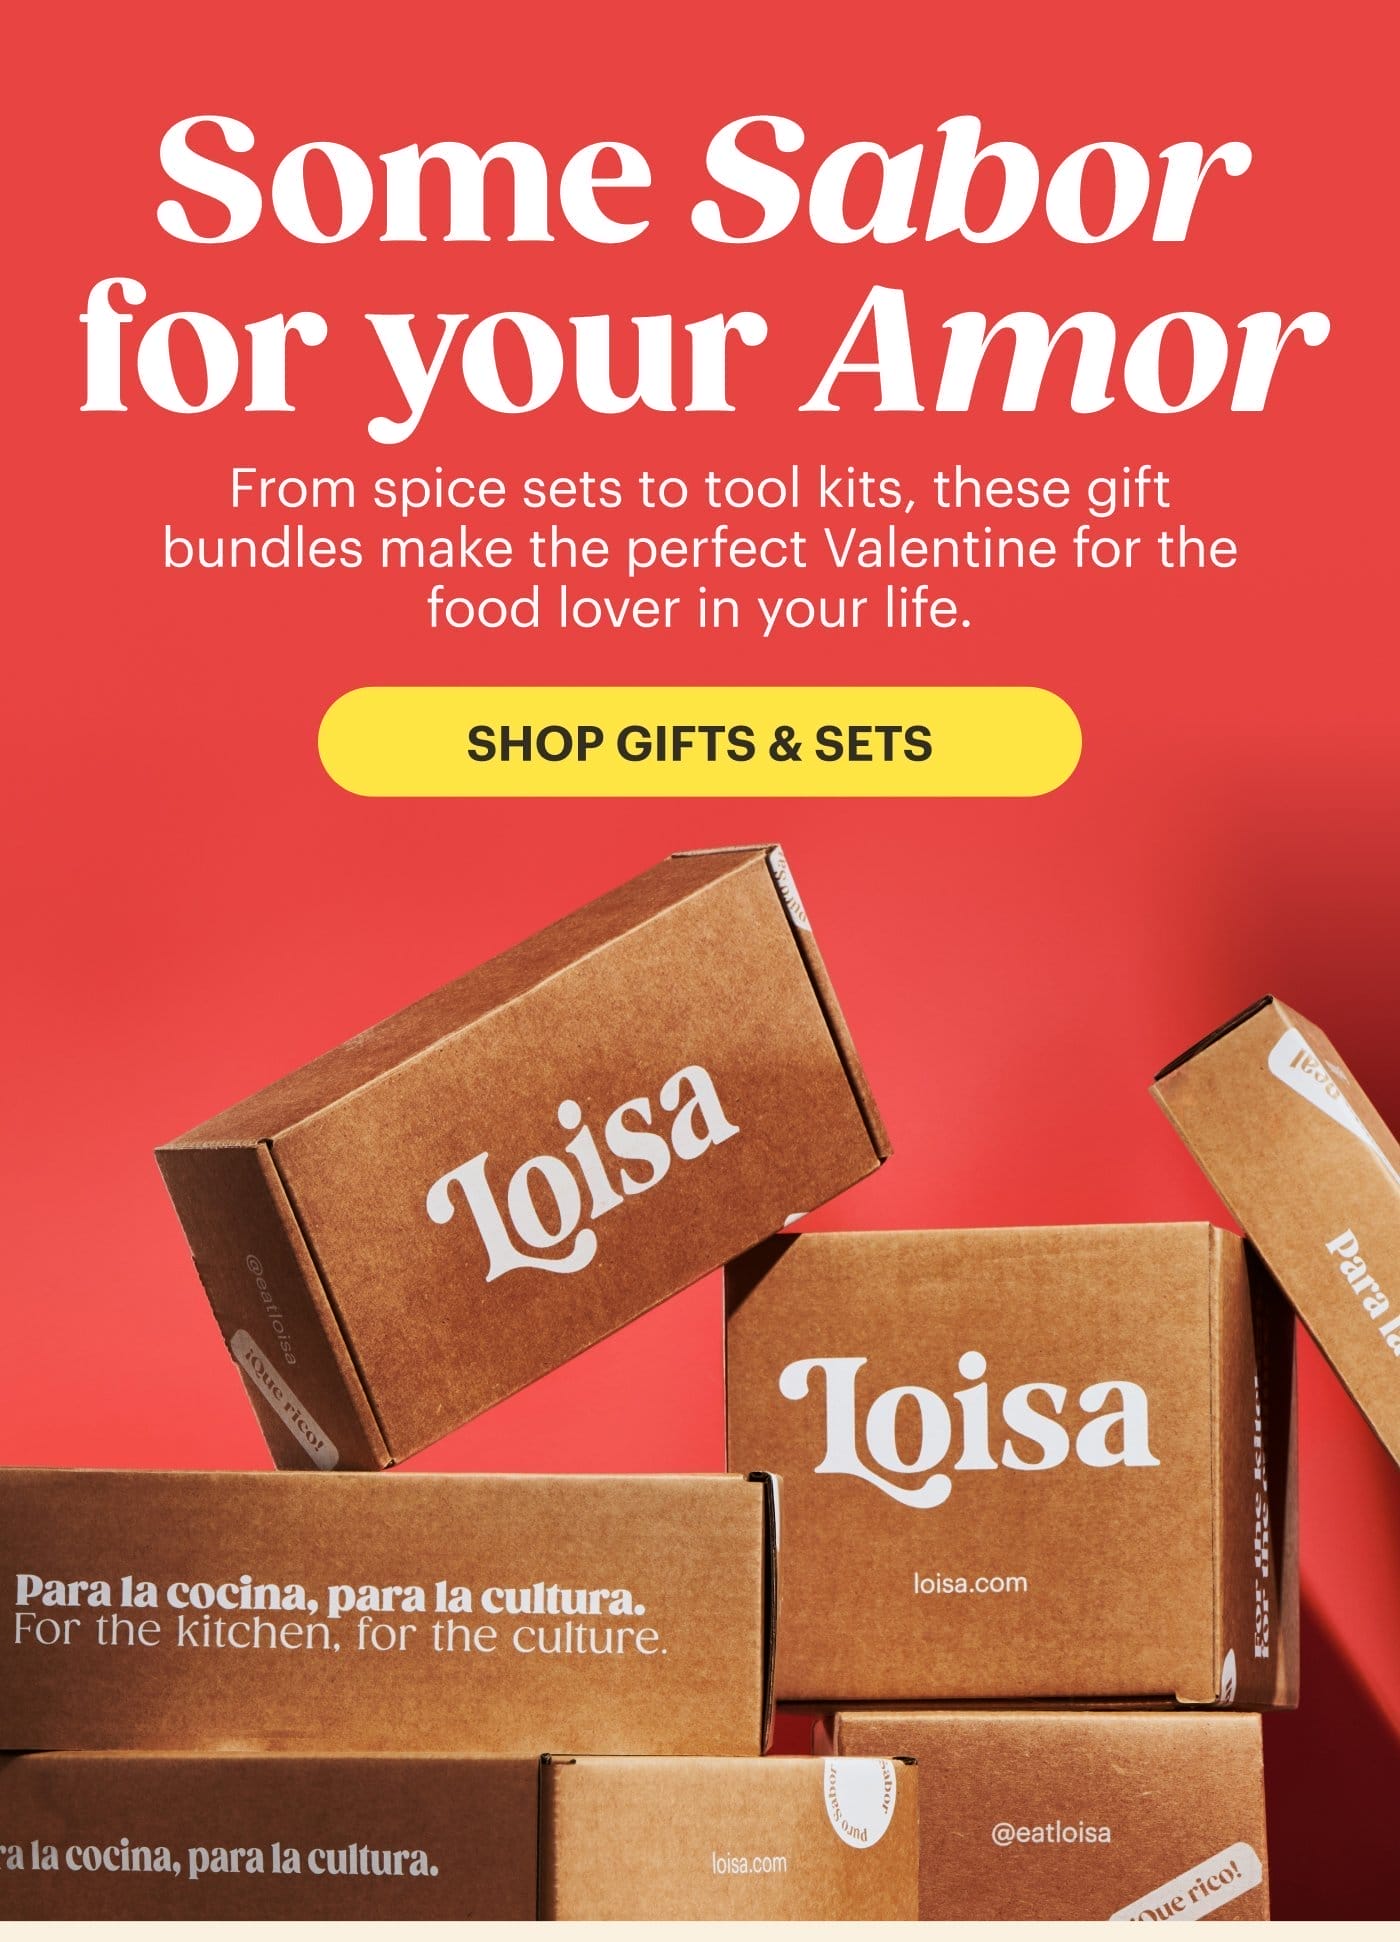 Some sabor for your amor SHOP GIFTS & SETS